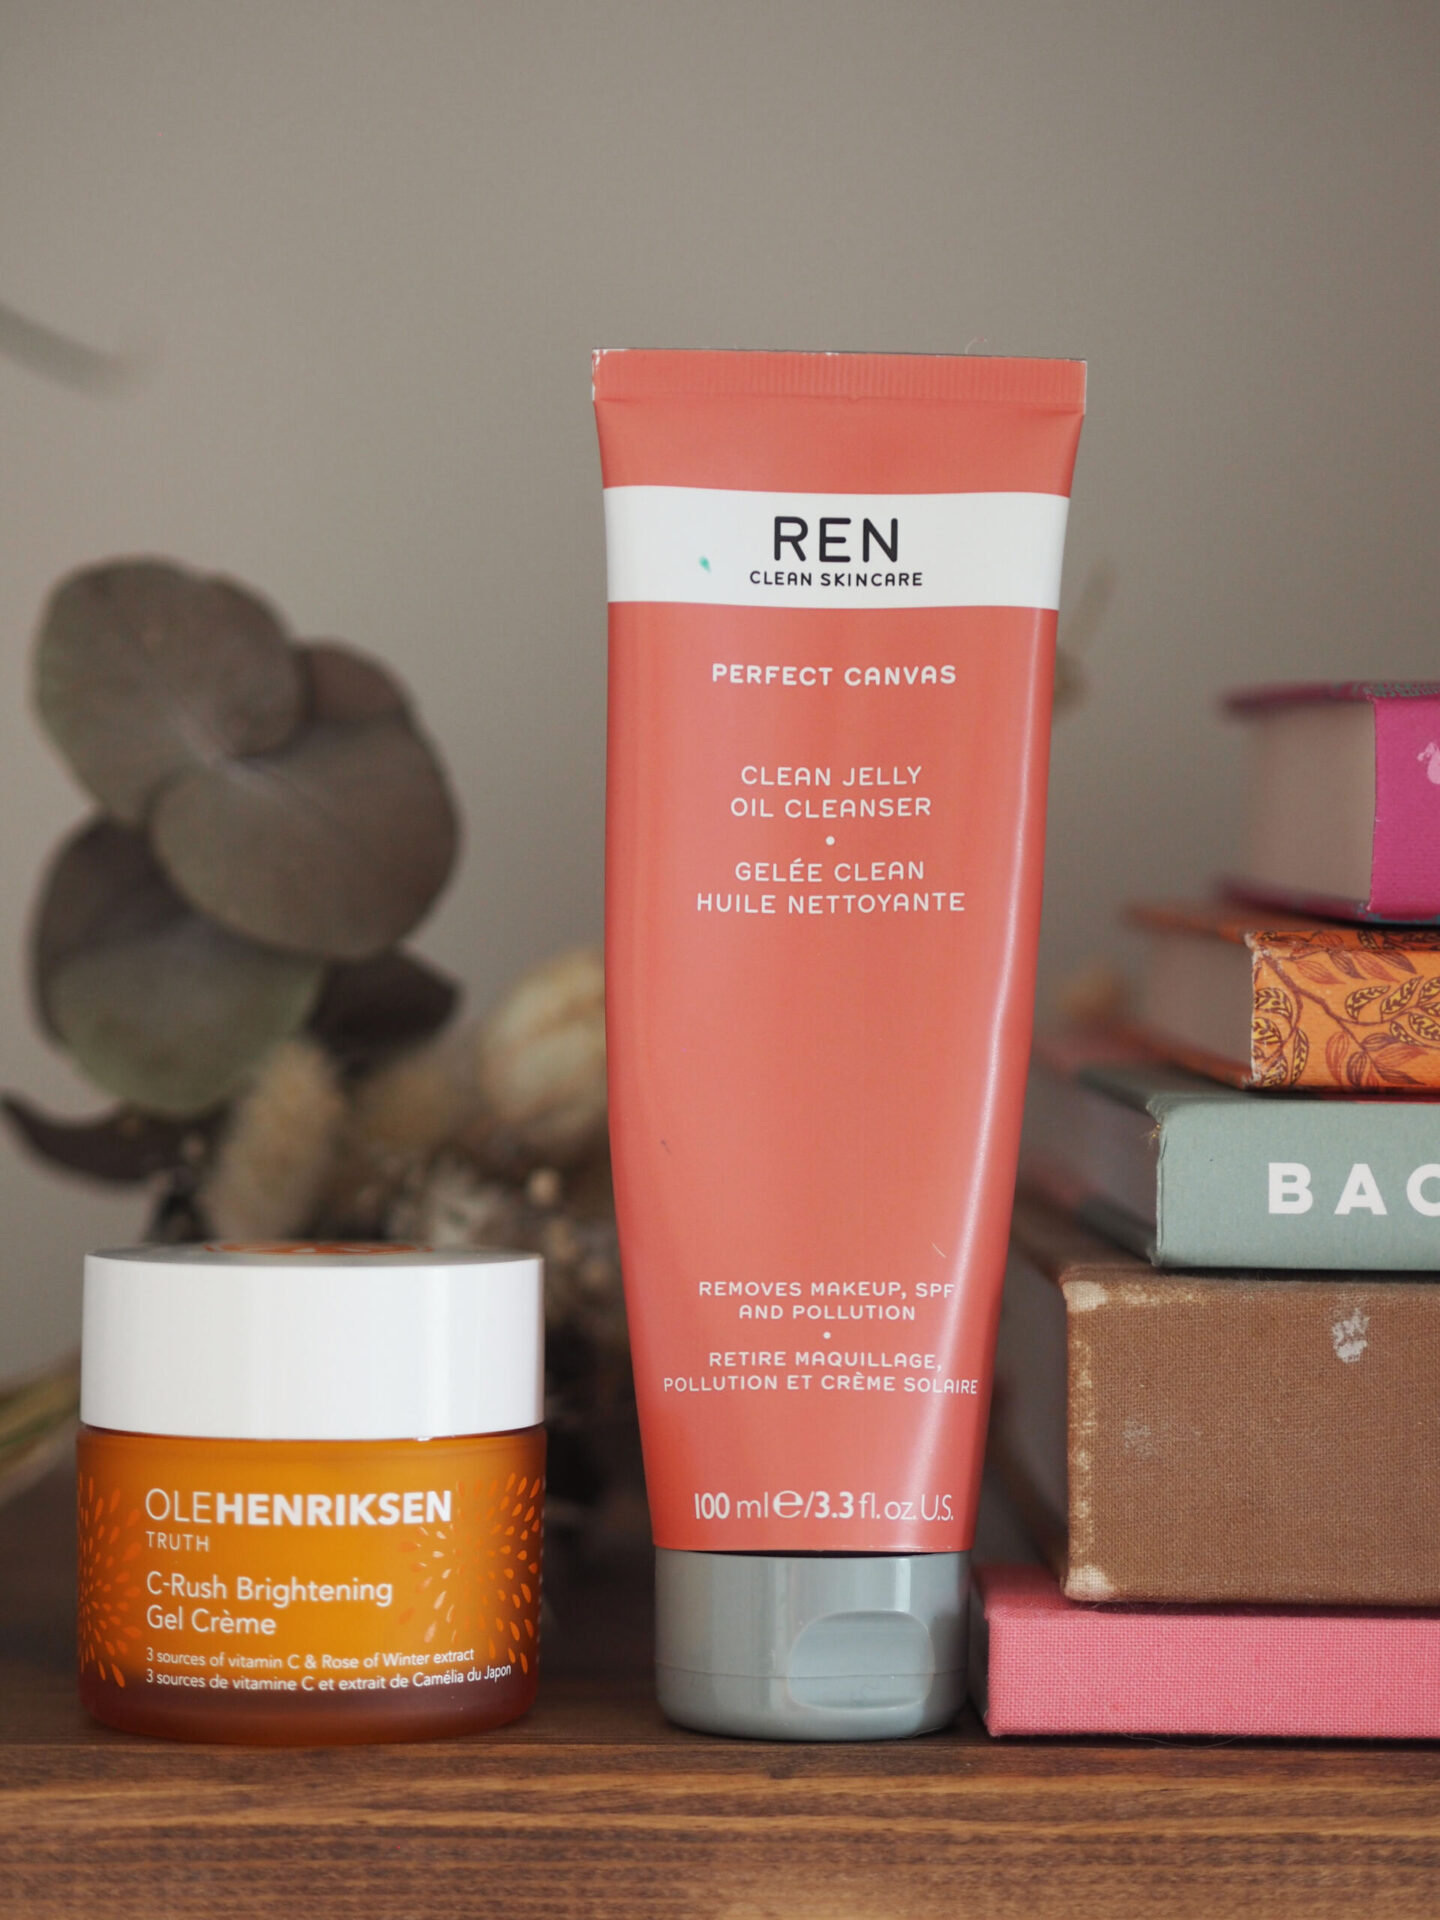 Ren perfect canvas clean jelly oil cleanser